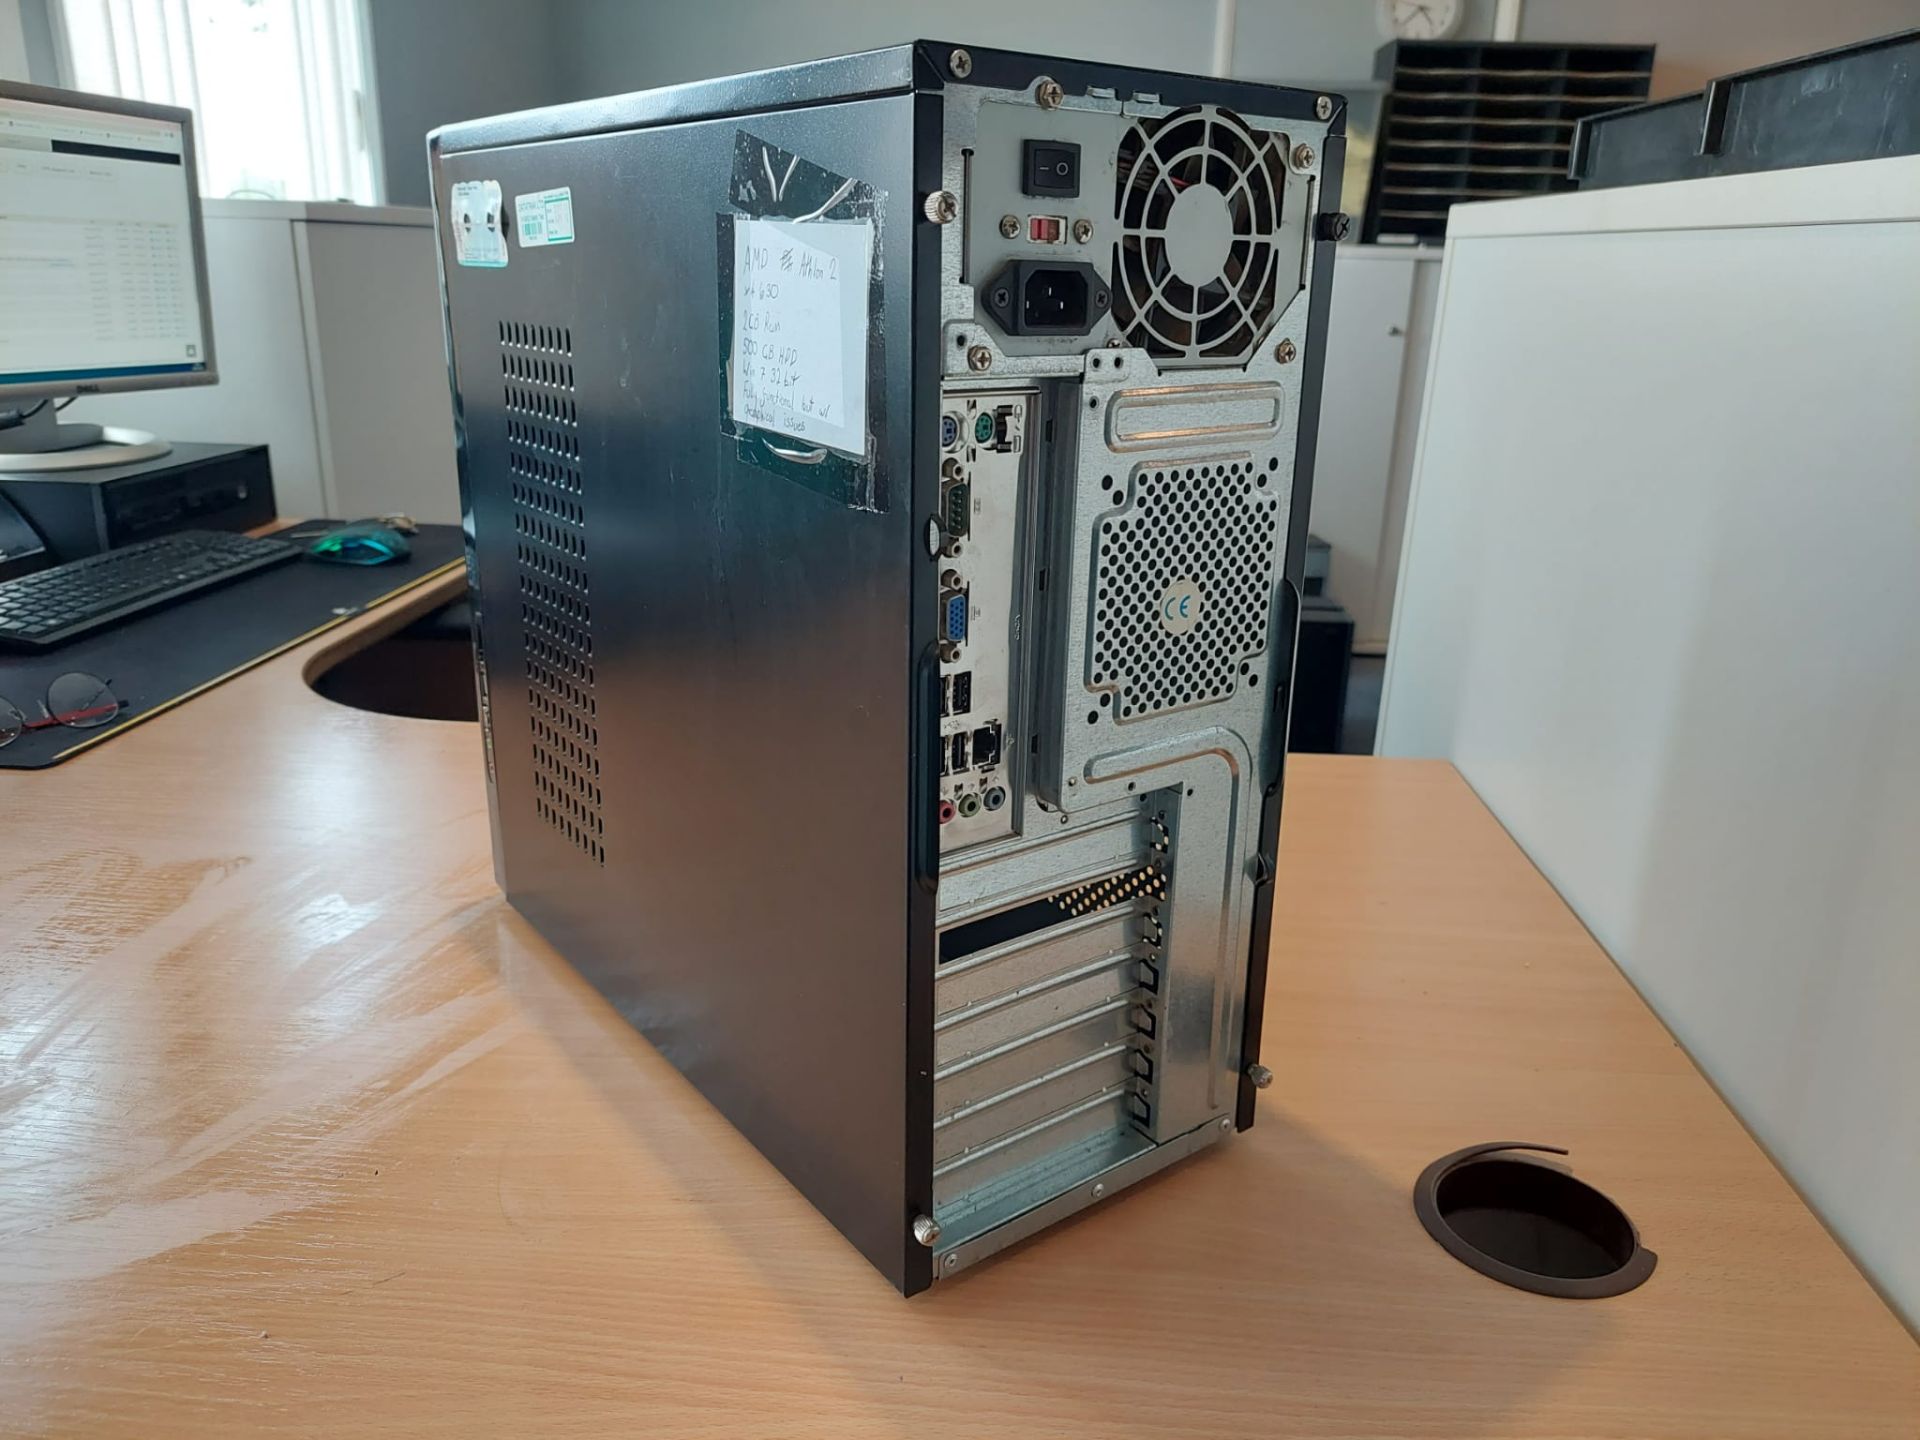 2010 Athlon II x4 360 PC (Has some issues) *NO VAT* - Image 5 of 12